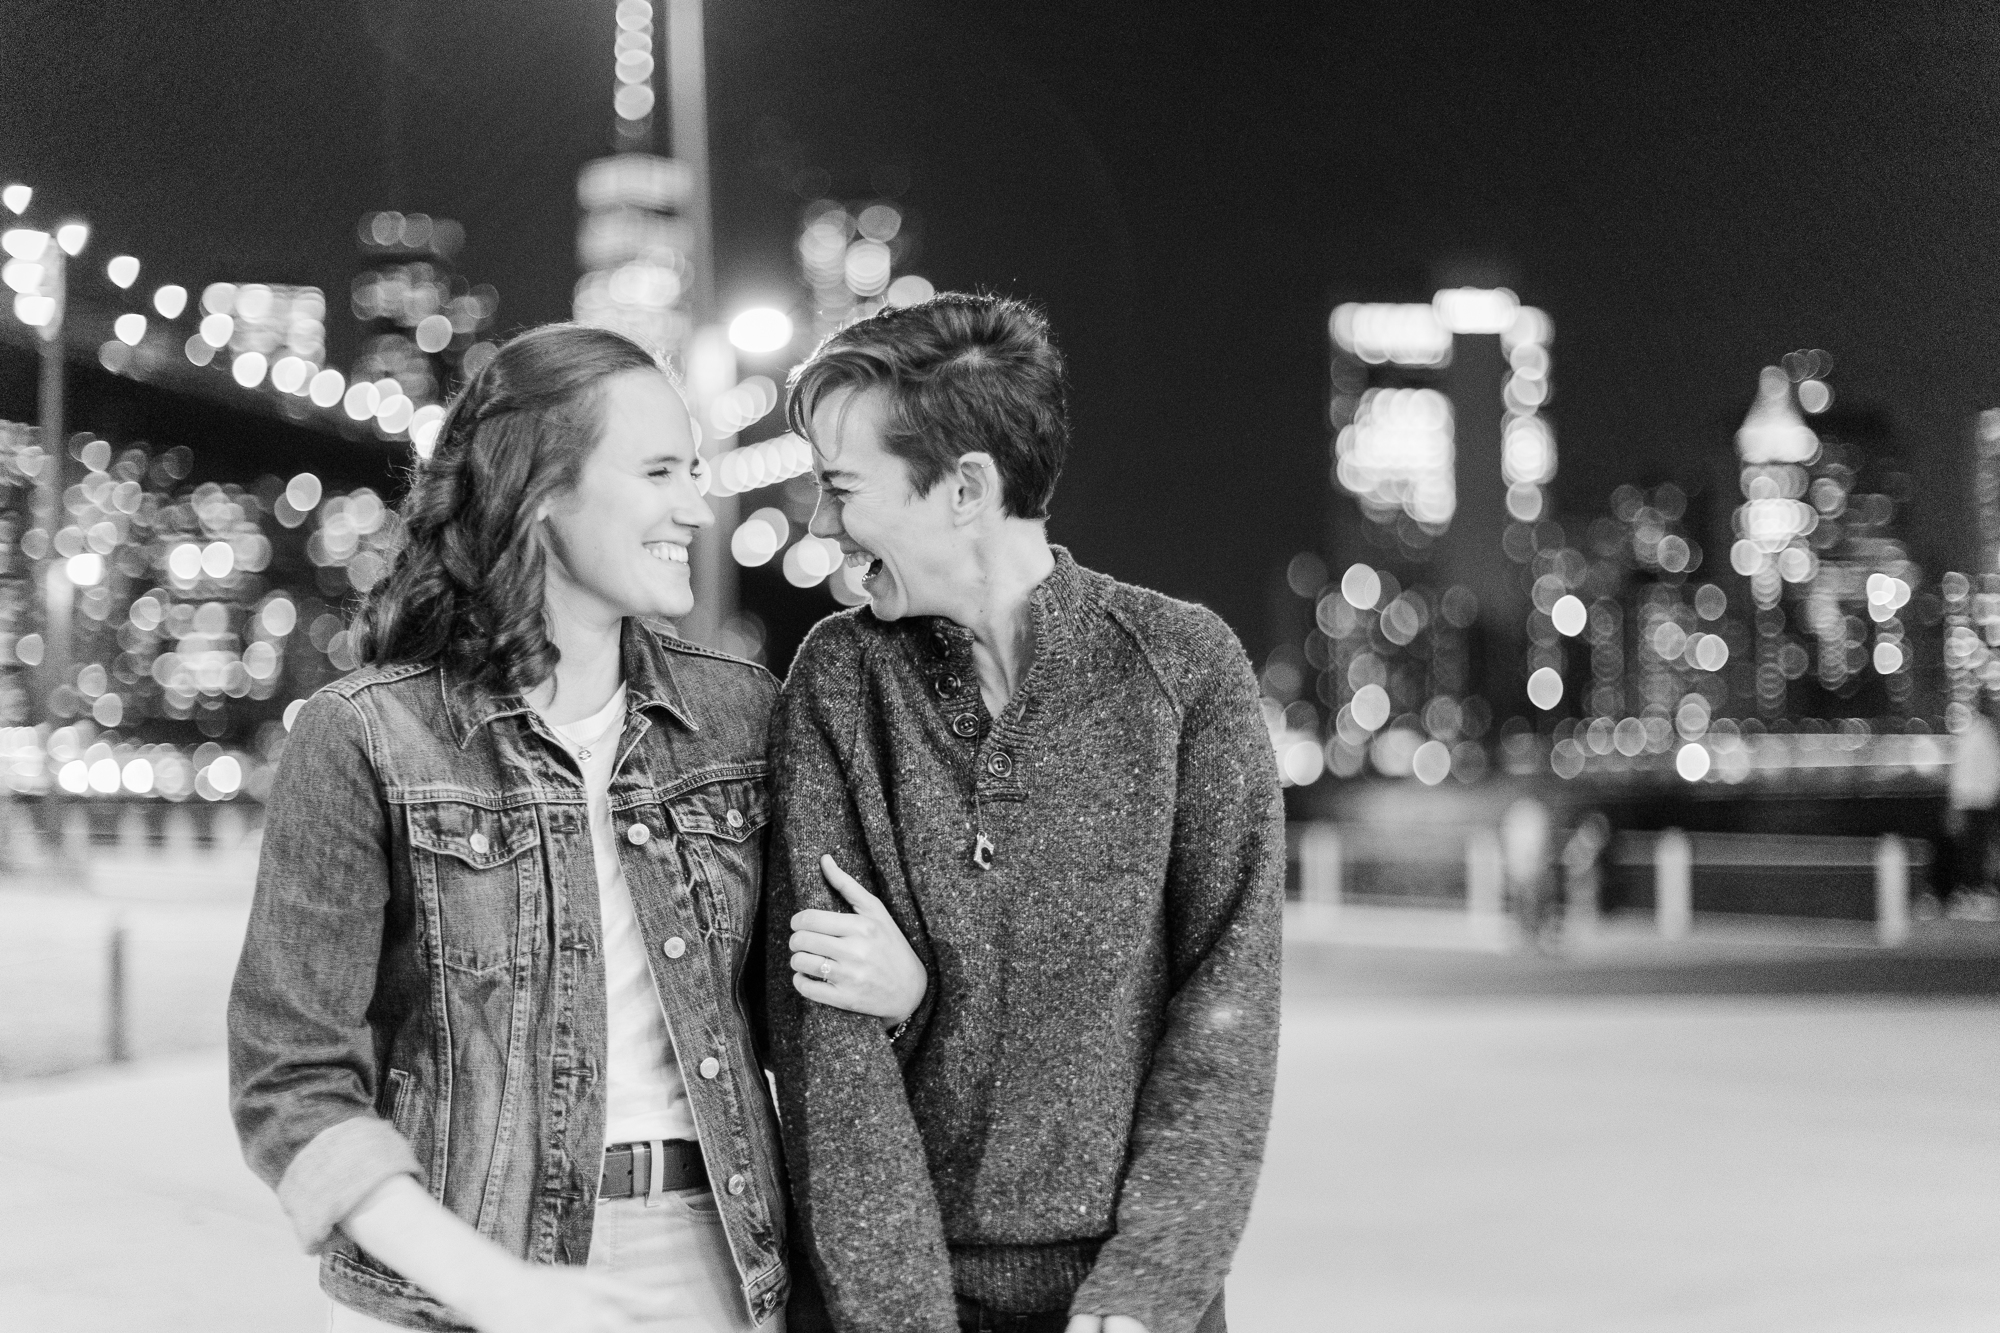 Jaw-Dropping DUMBO Engagement Photo Shoot in NYC